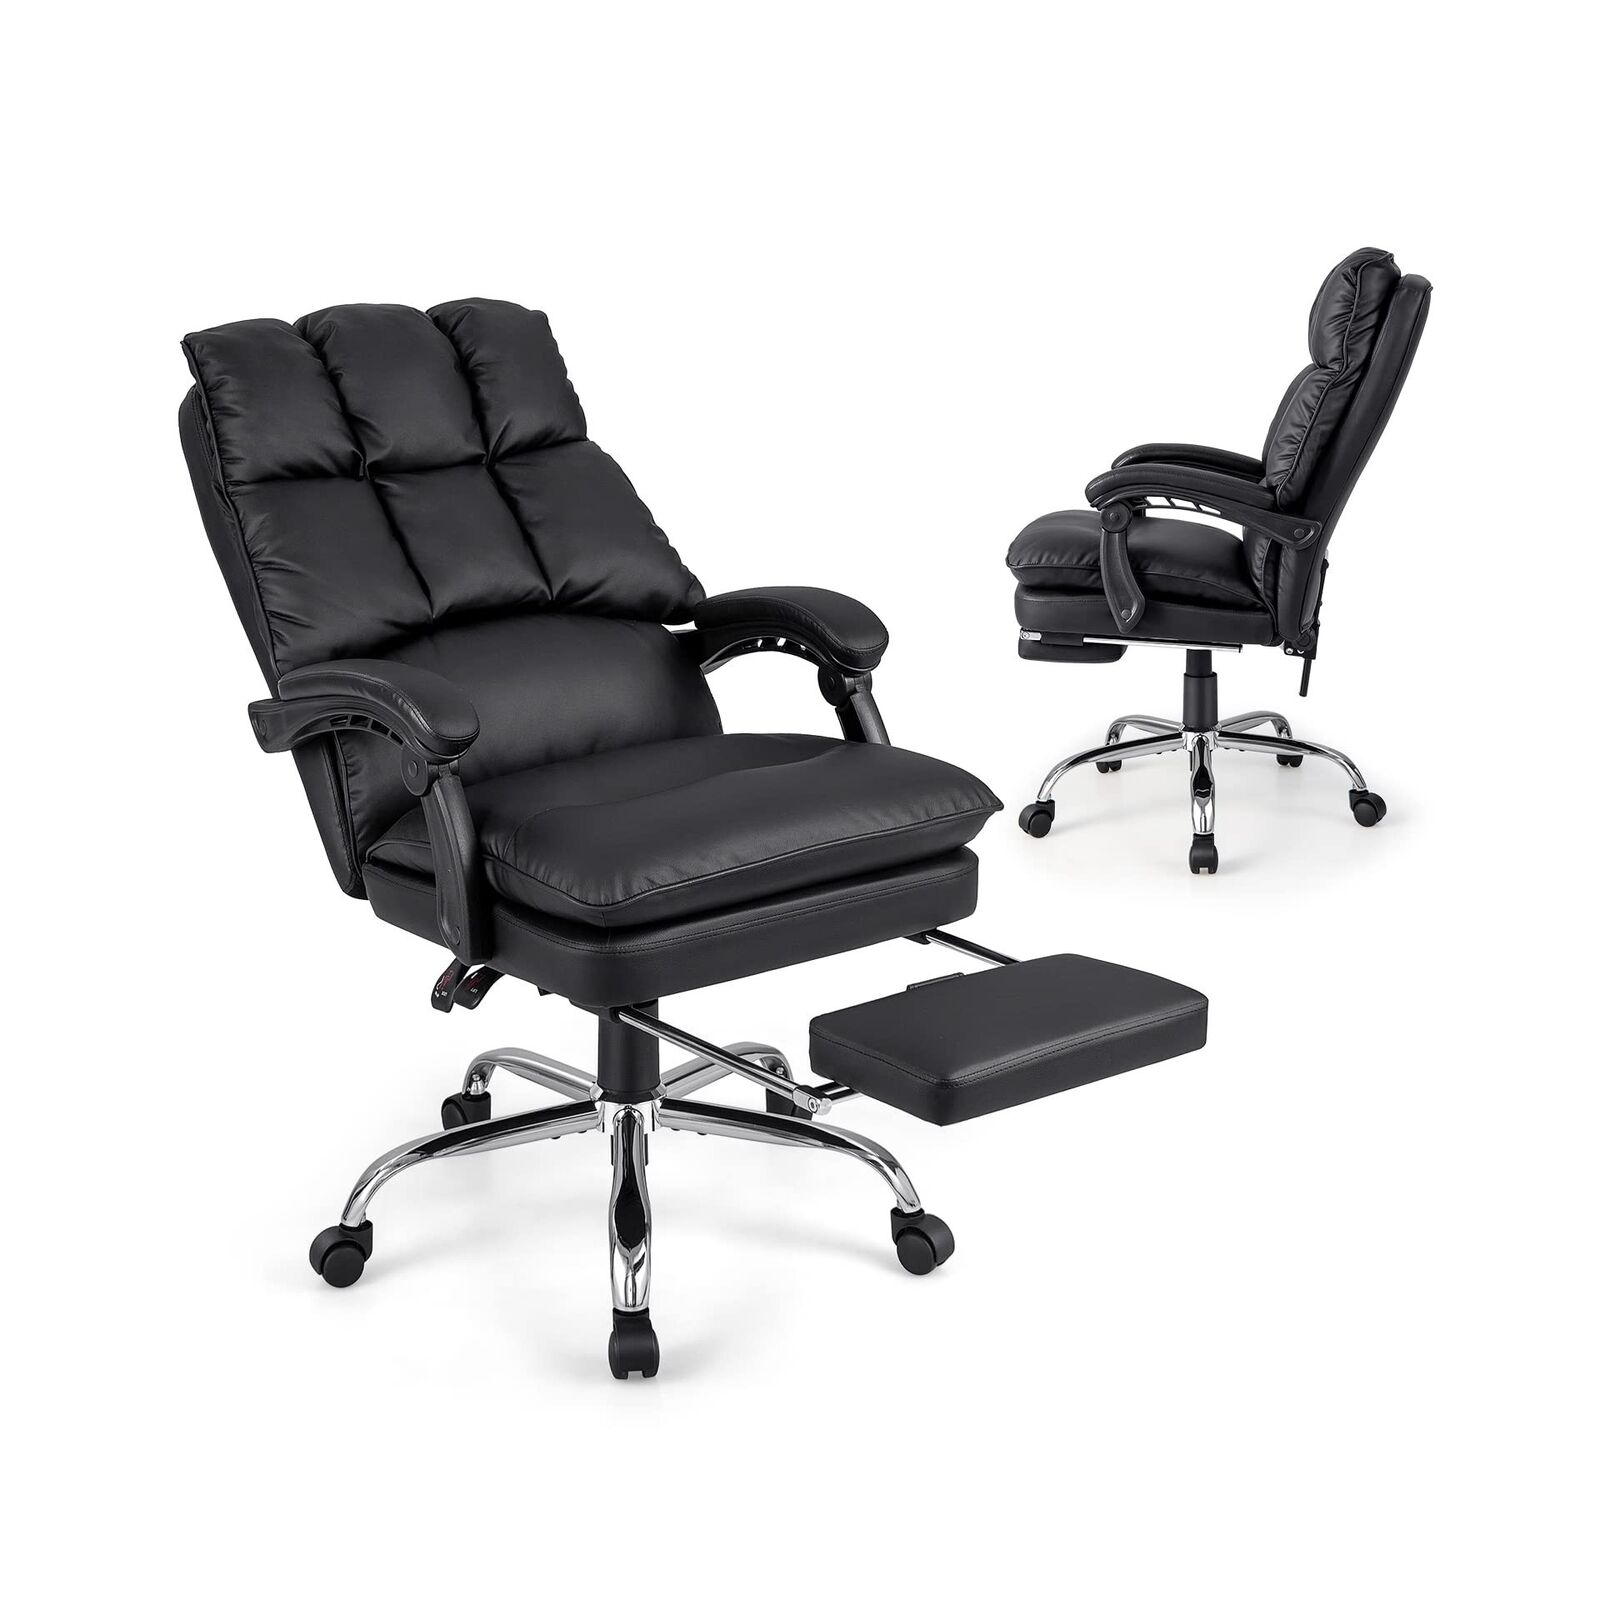 Giantex Executive Office Chair, PU Leather Reclining Chair with Retractable F...